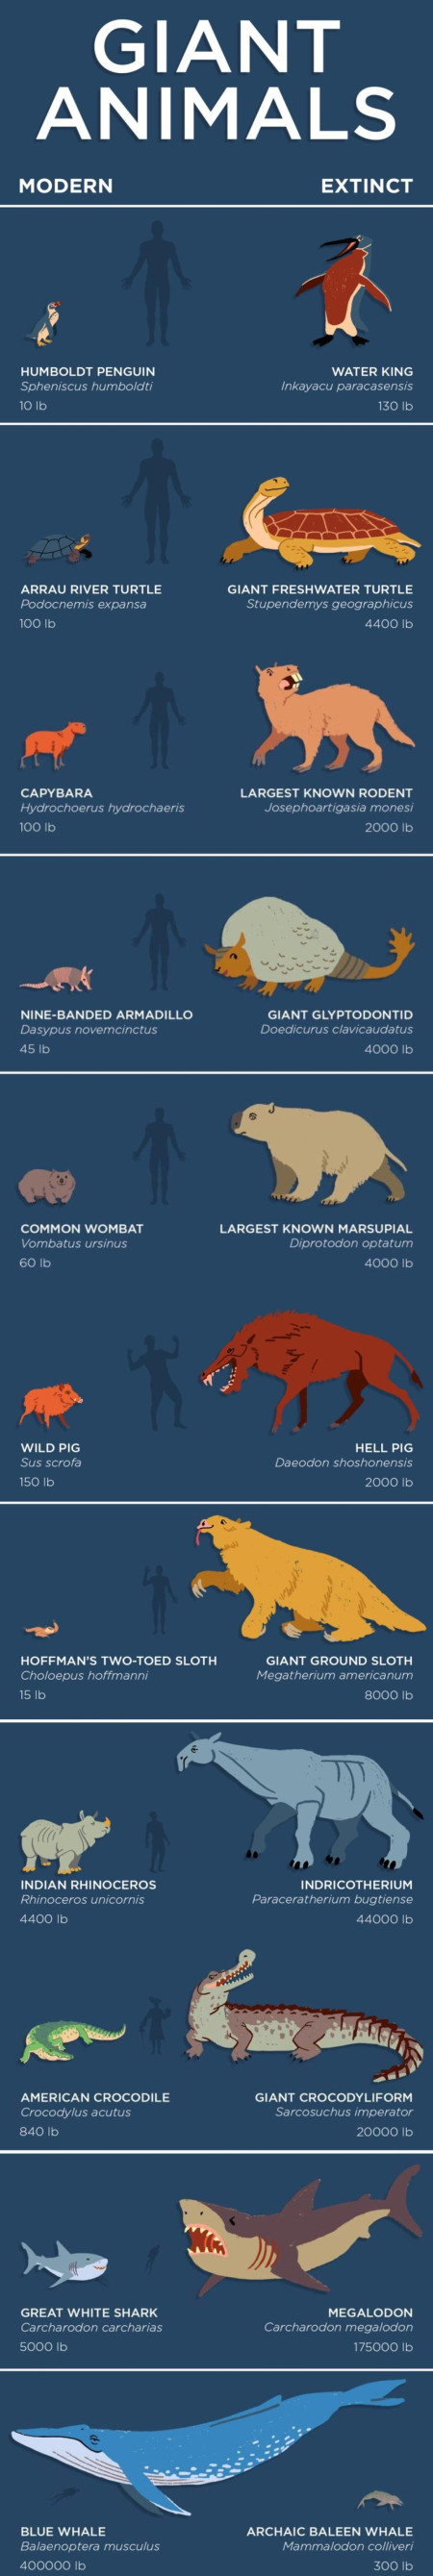 Giant Animals throughout history